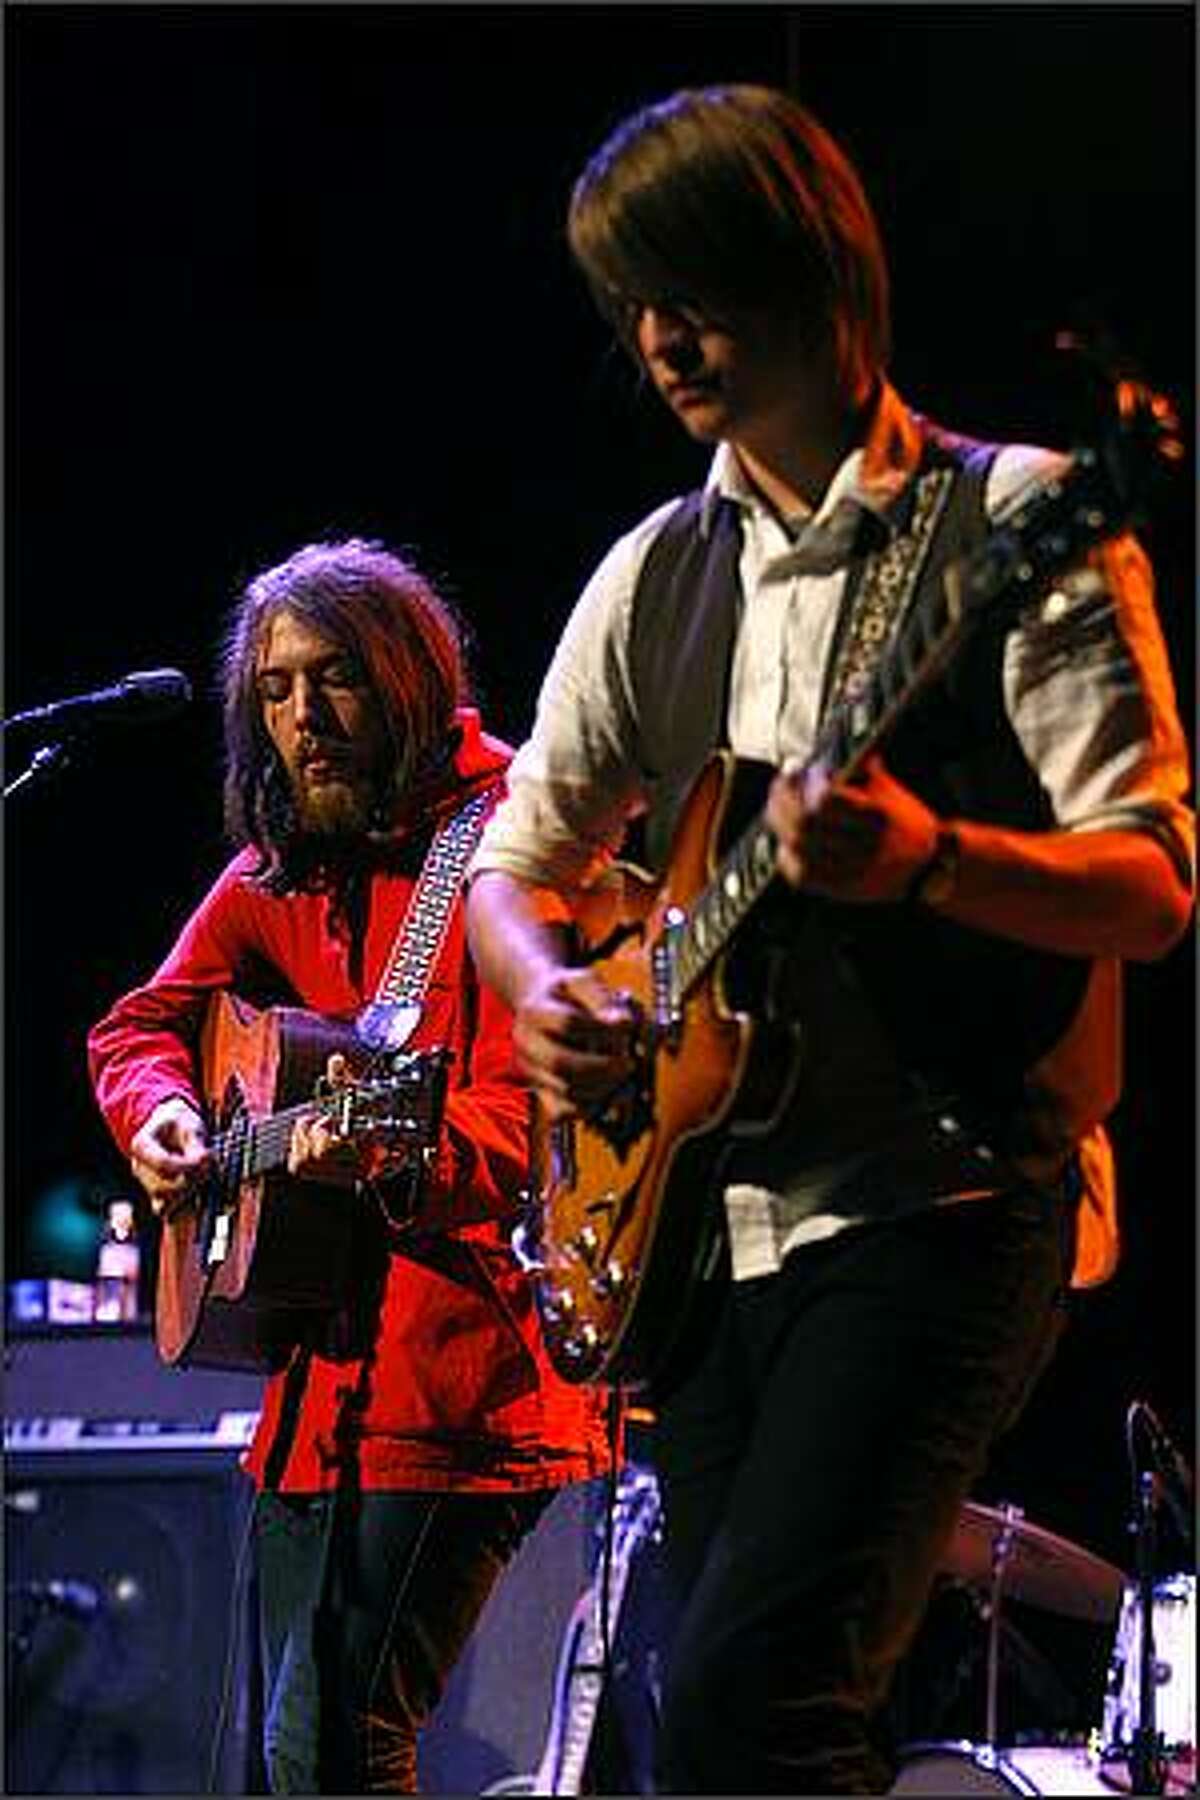 Robin Pecknold, left, and Skye Skjelset, of Fleet Foxes, perform at the Moore Theater in Seattle.